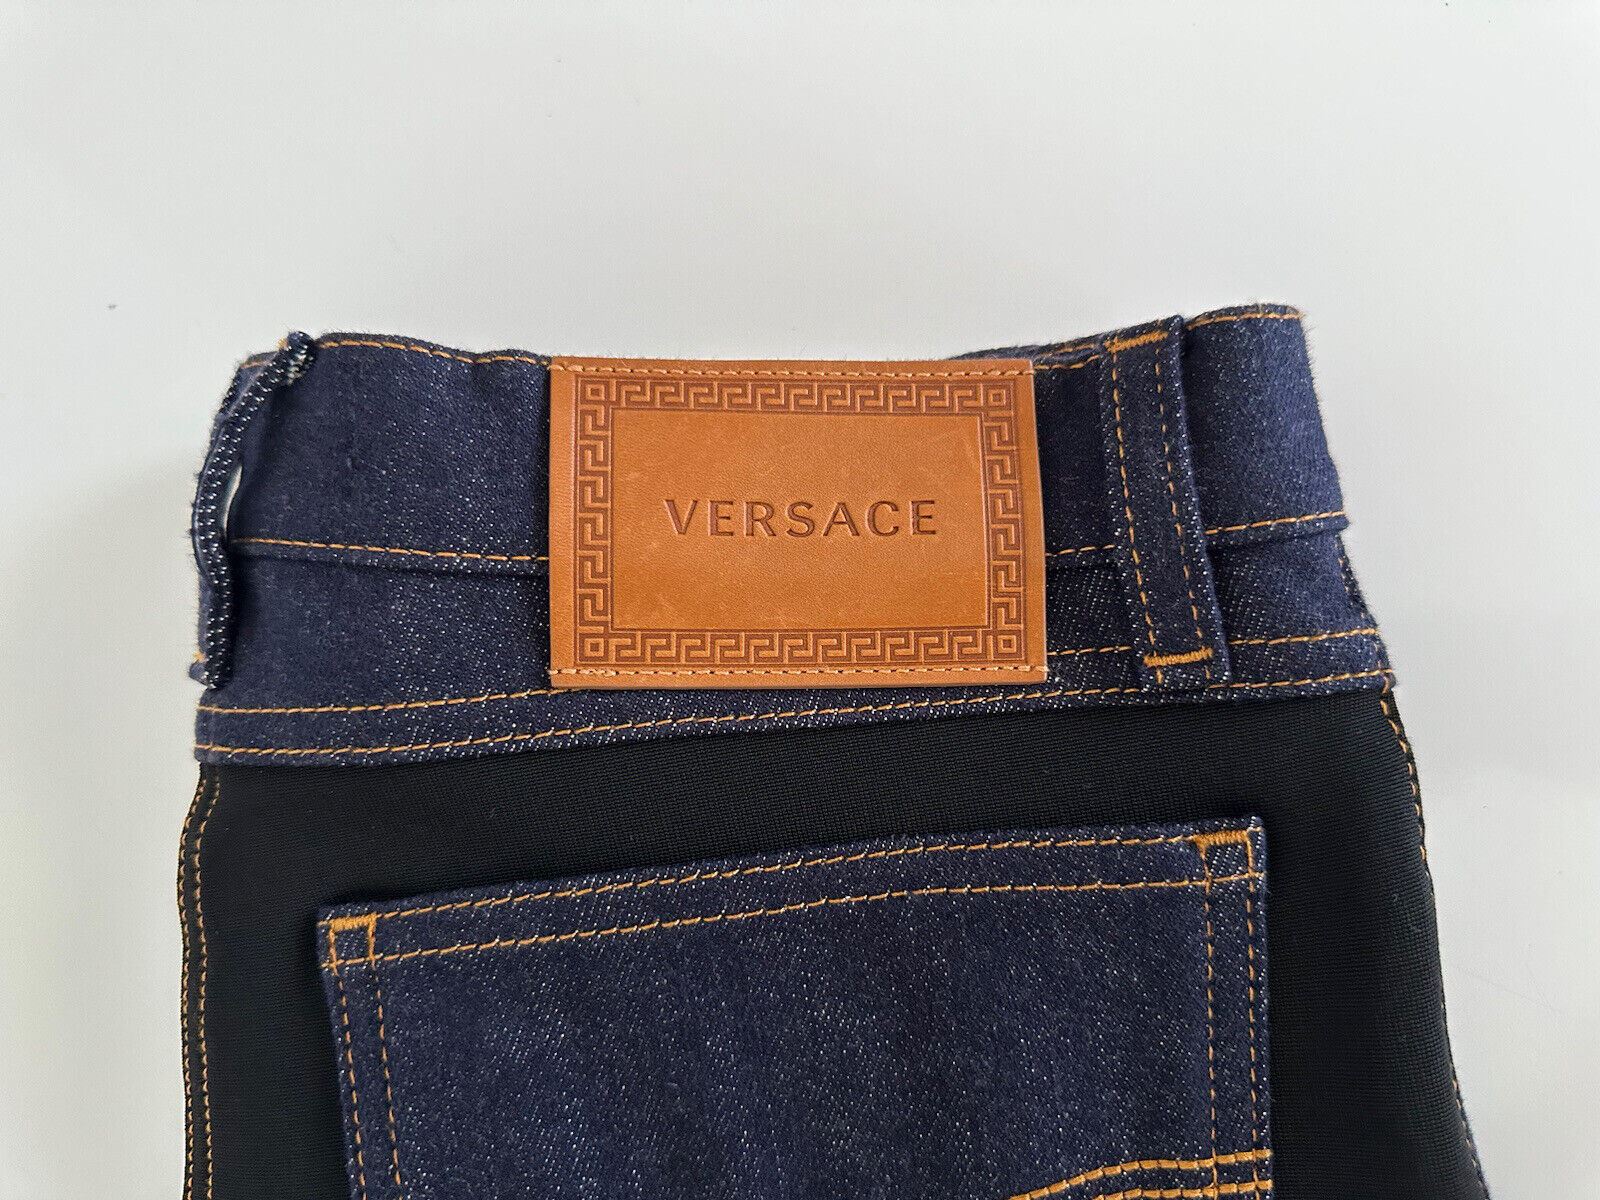 NWT $925 Versace Women's Denim Blue Jeans Size 27 US 1003998 Made in Italy